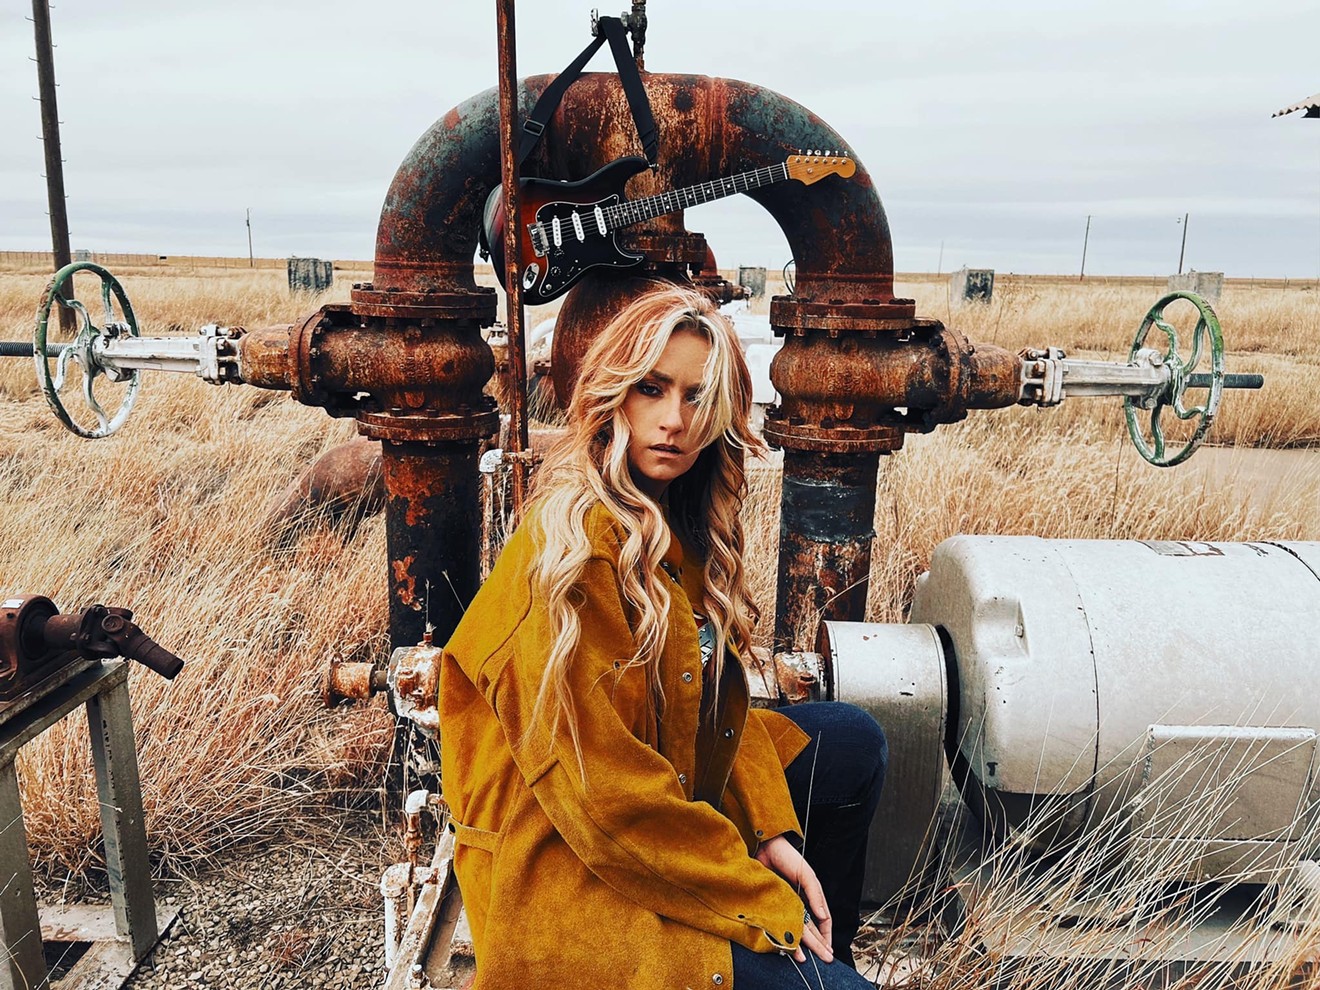 Country singer Clare Dunn's new single "Colorado" was inspired by her family's ranch.